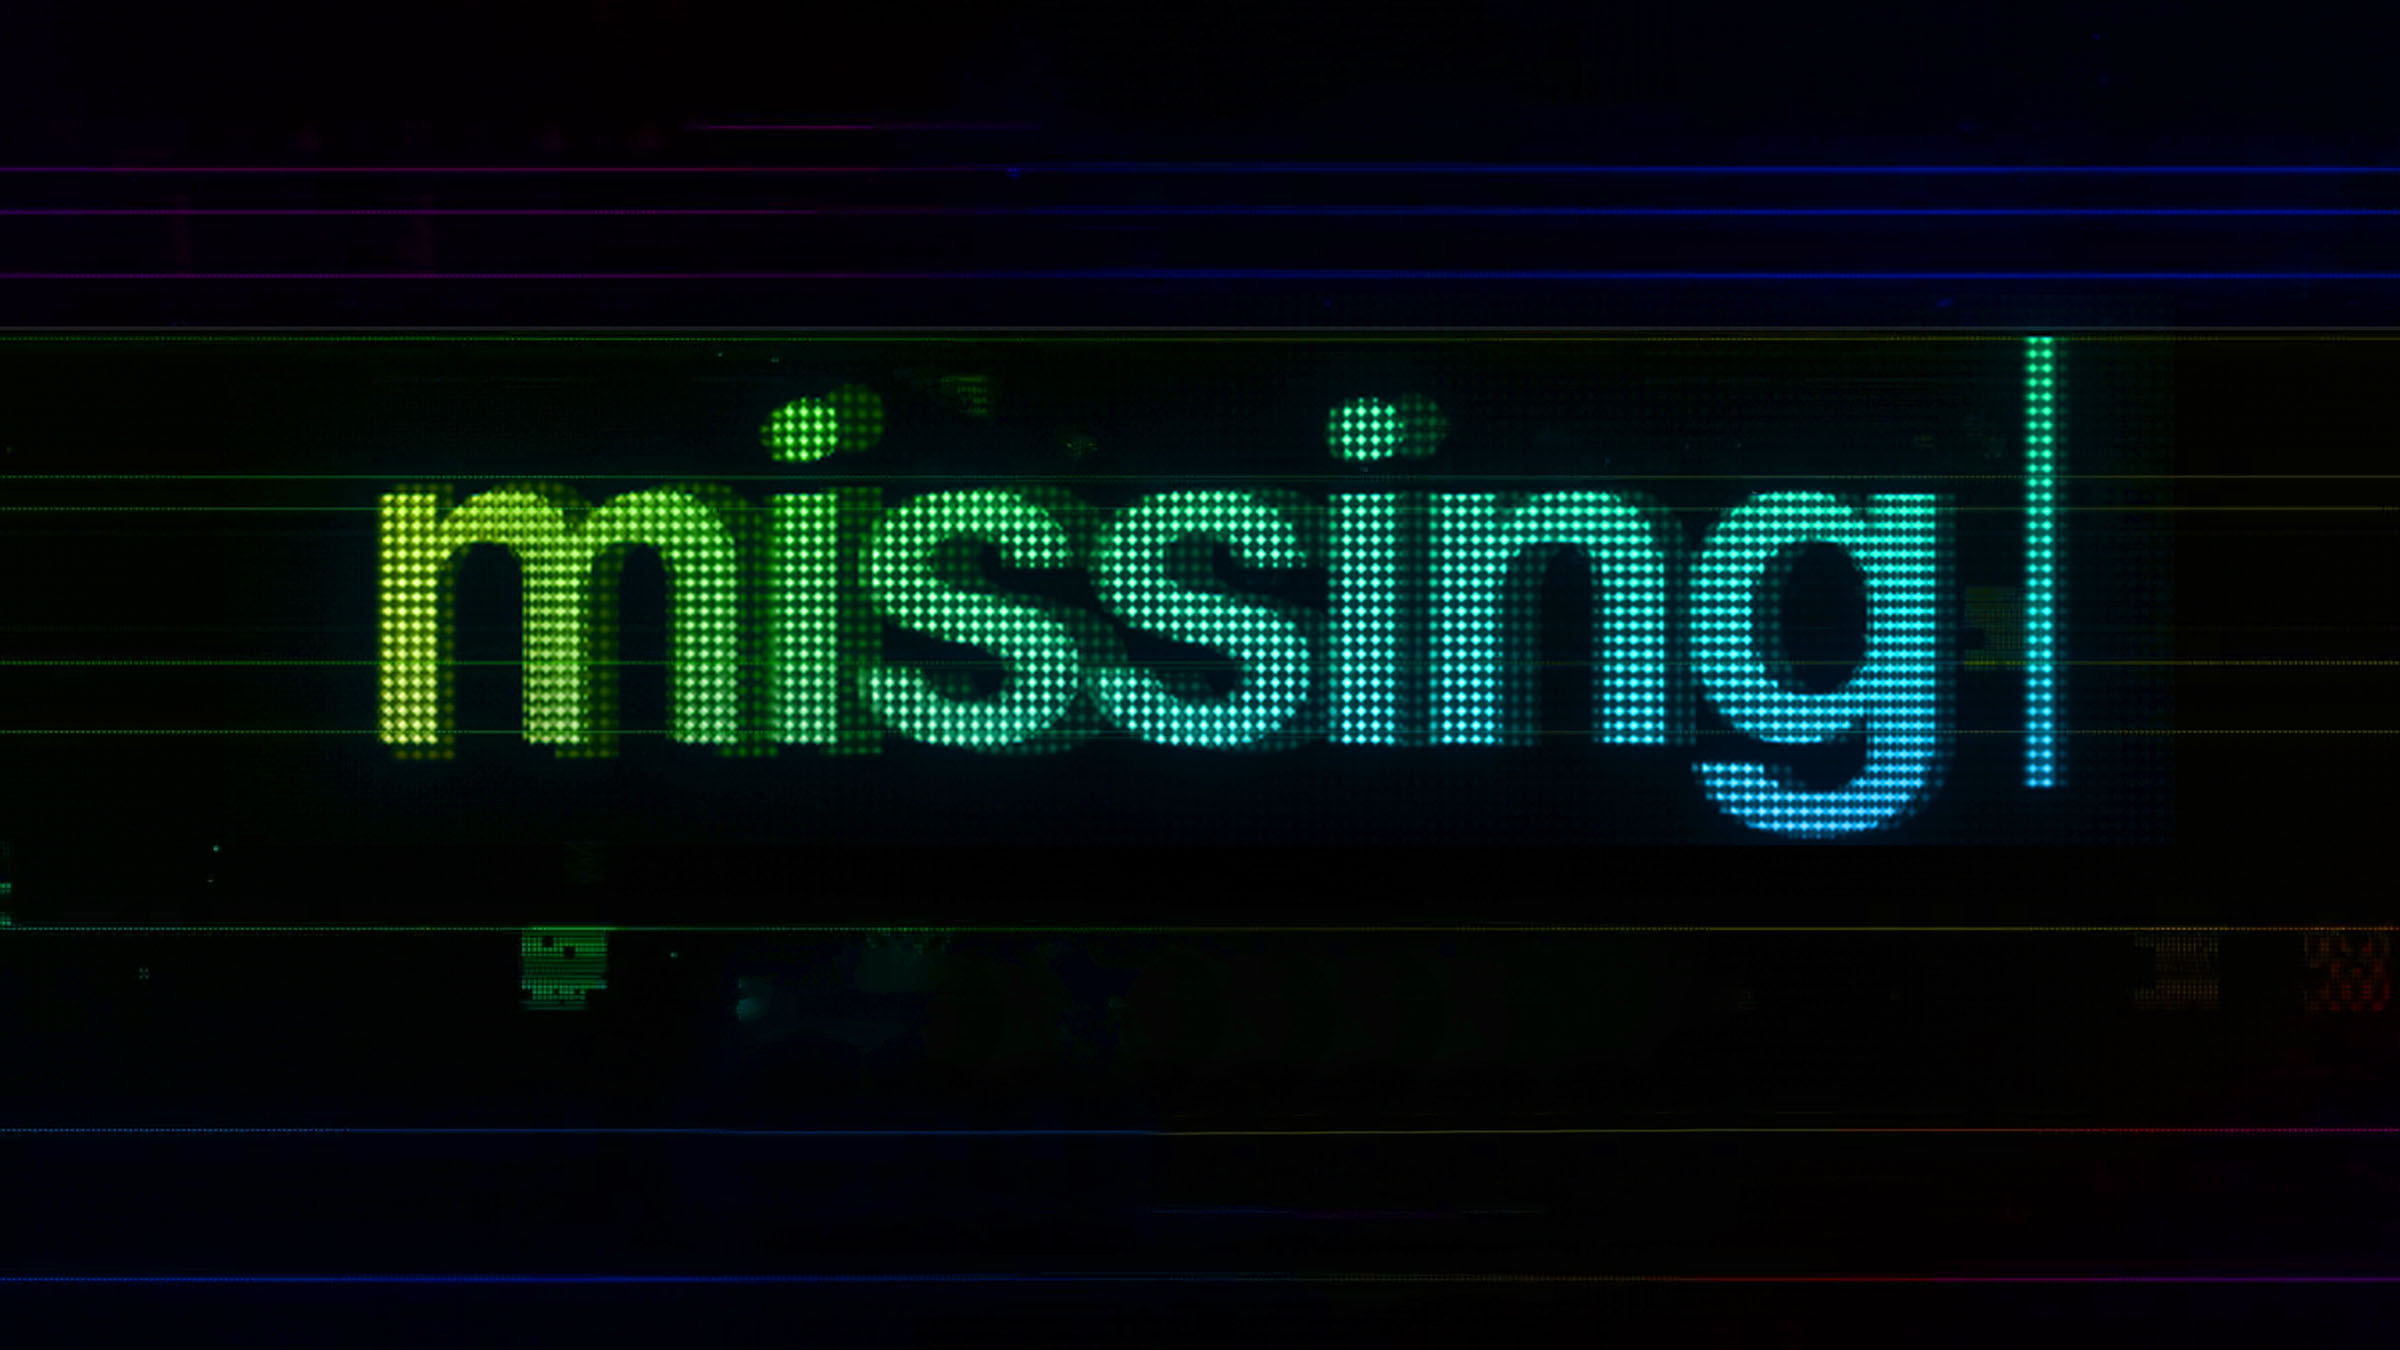 Made in Frame: How “Missing” Builds a Modern Cinematic Language